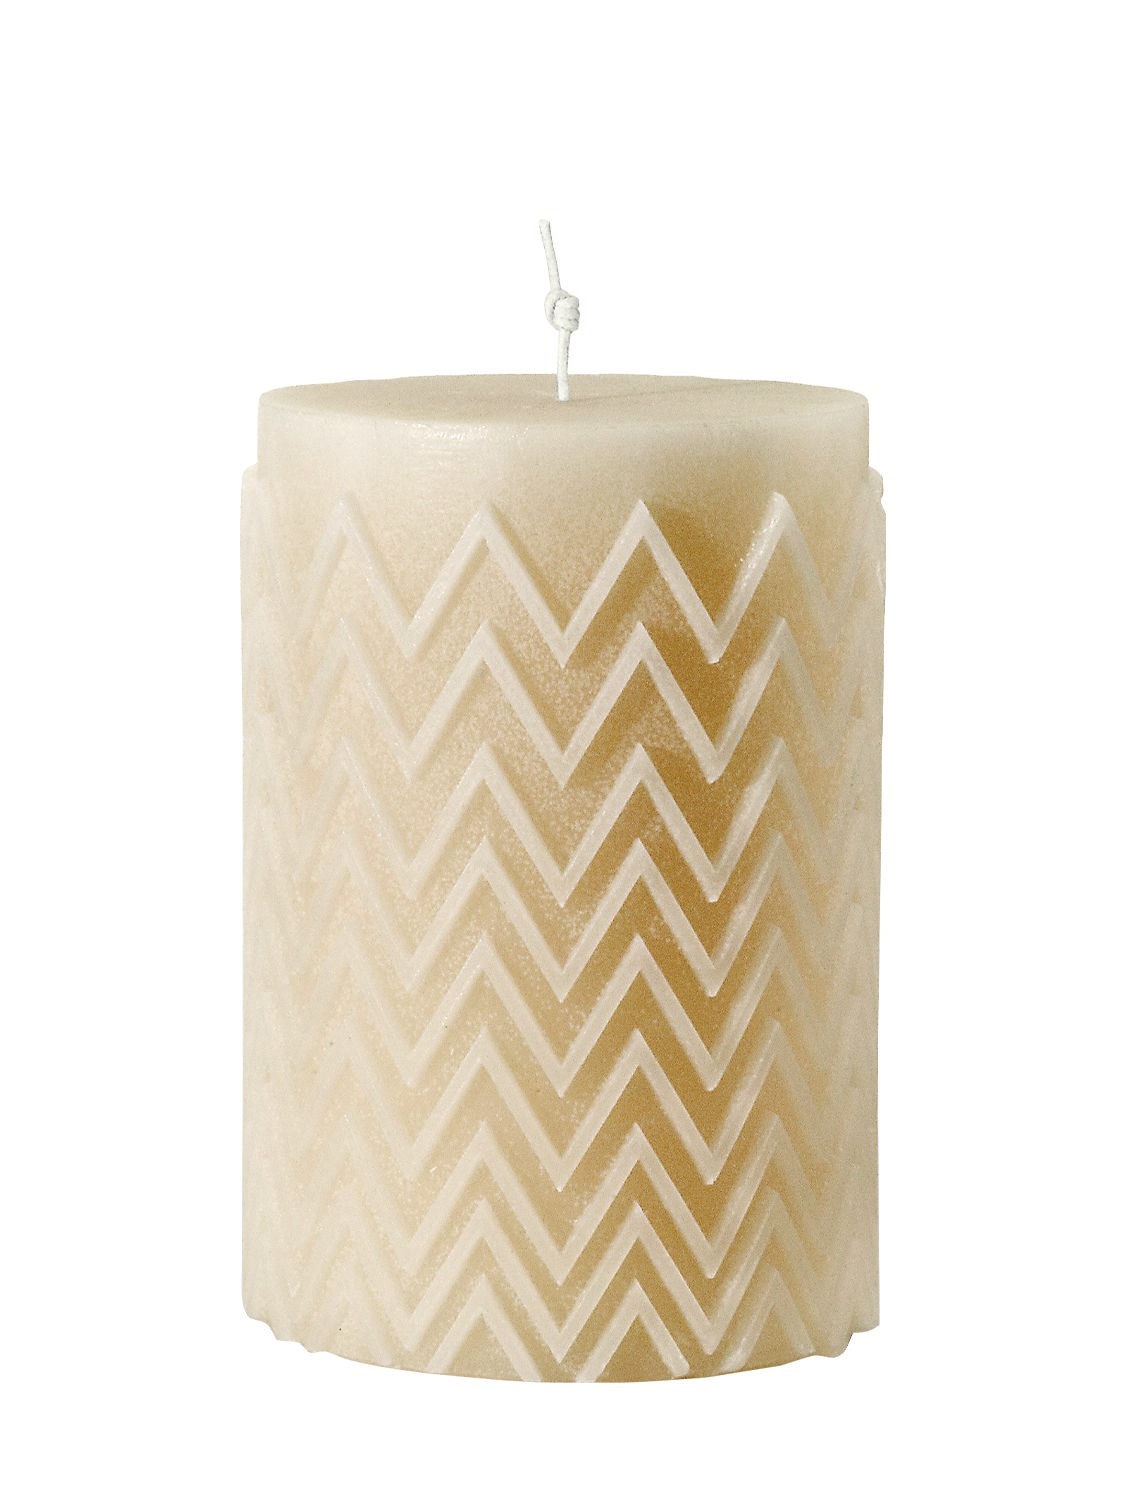 Missoni Home Collection Chevron Candle In Beige